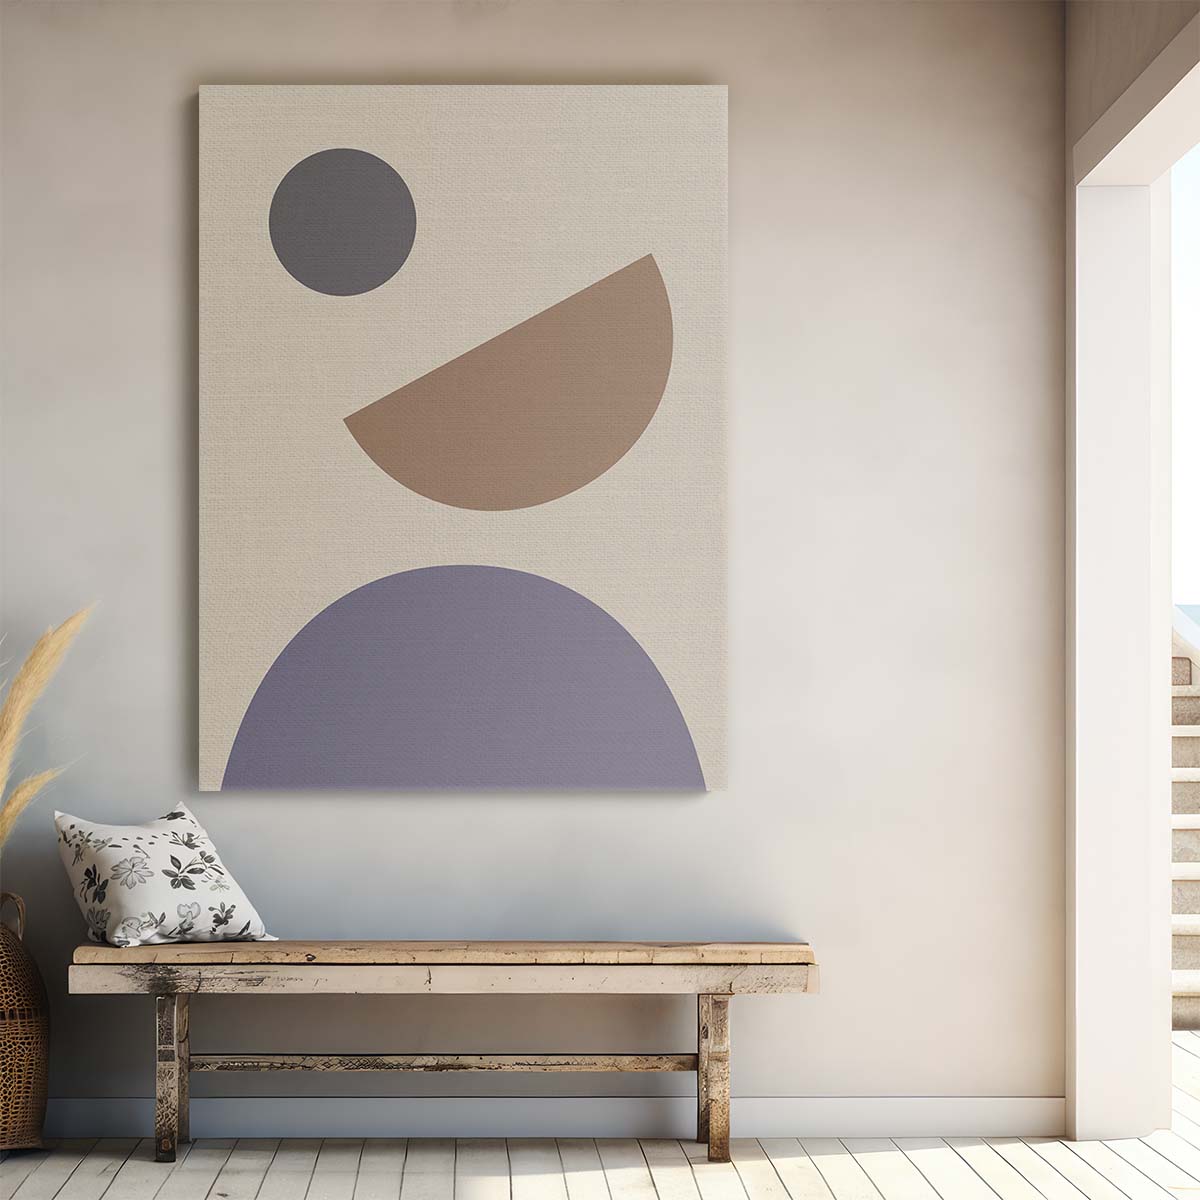 Minimalist Beige Geometric Abstract Circle Illustration Artwork by Luxuriance Designs, made in USA